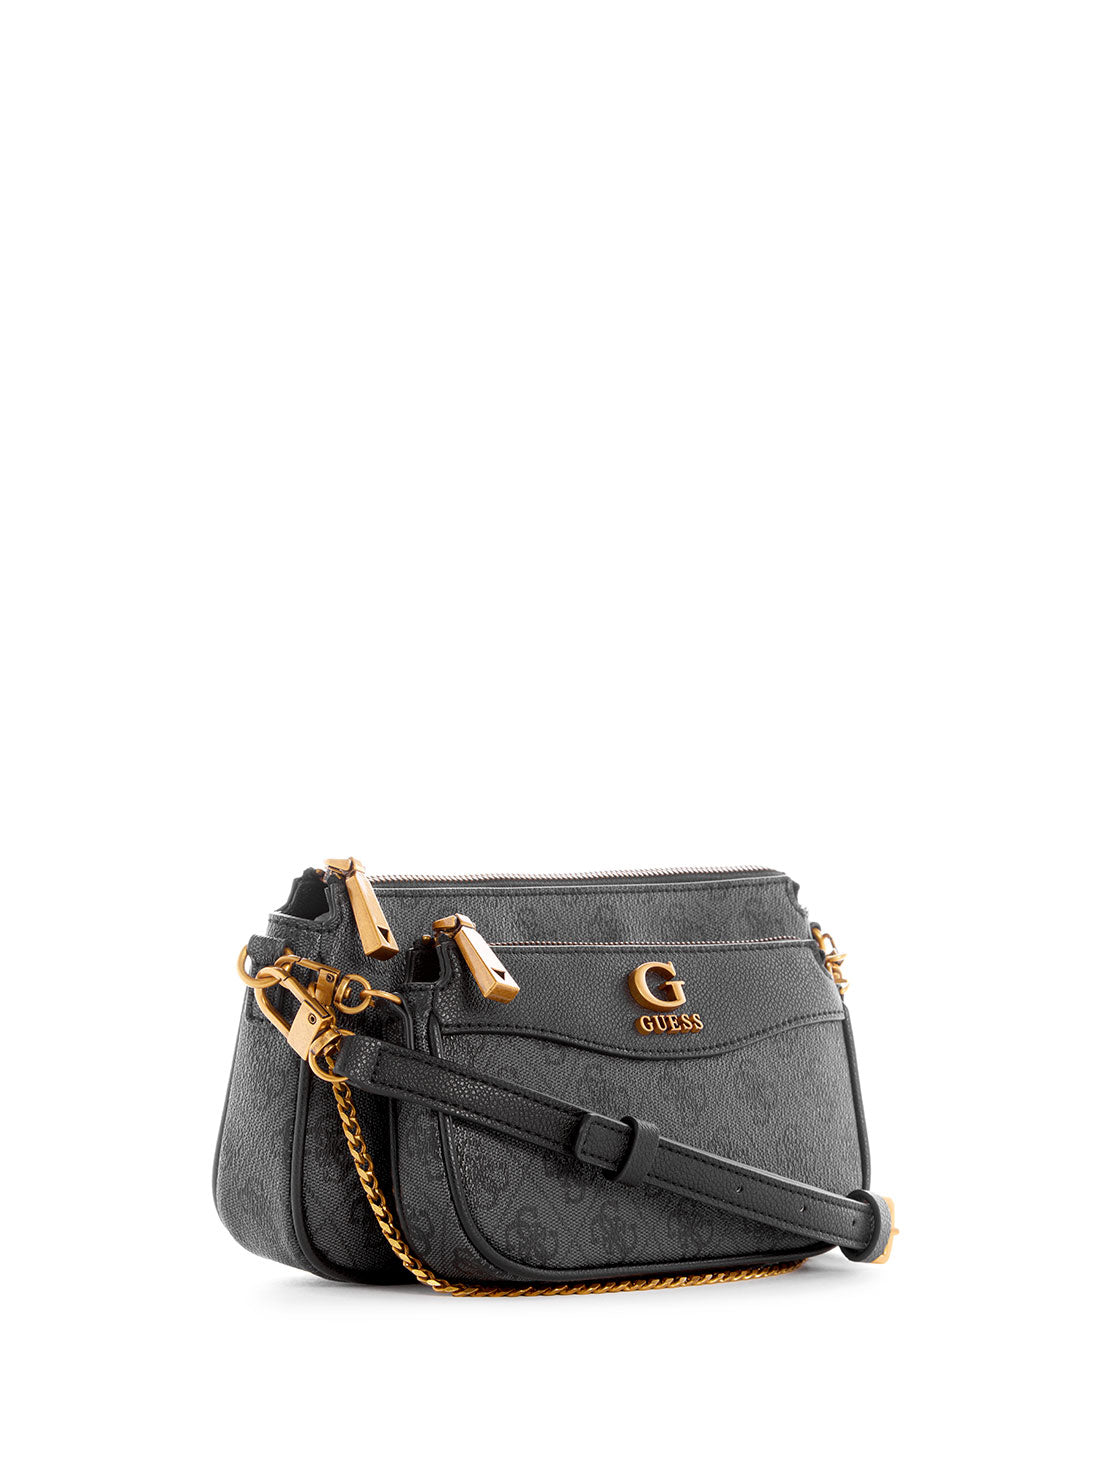 GUESS Women's Coal Logo Nell Crossbody Pouch Bag SB873570 Front Side View